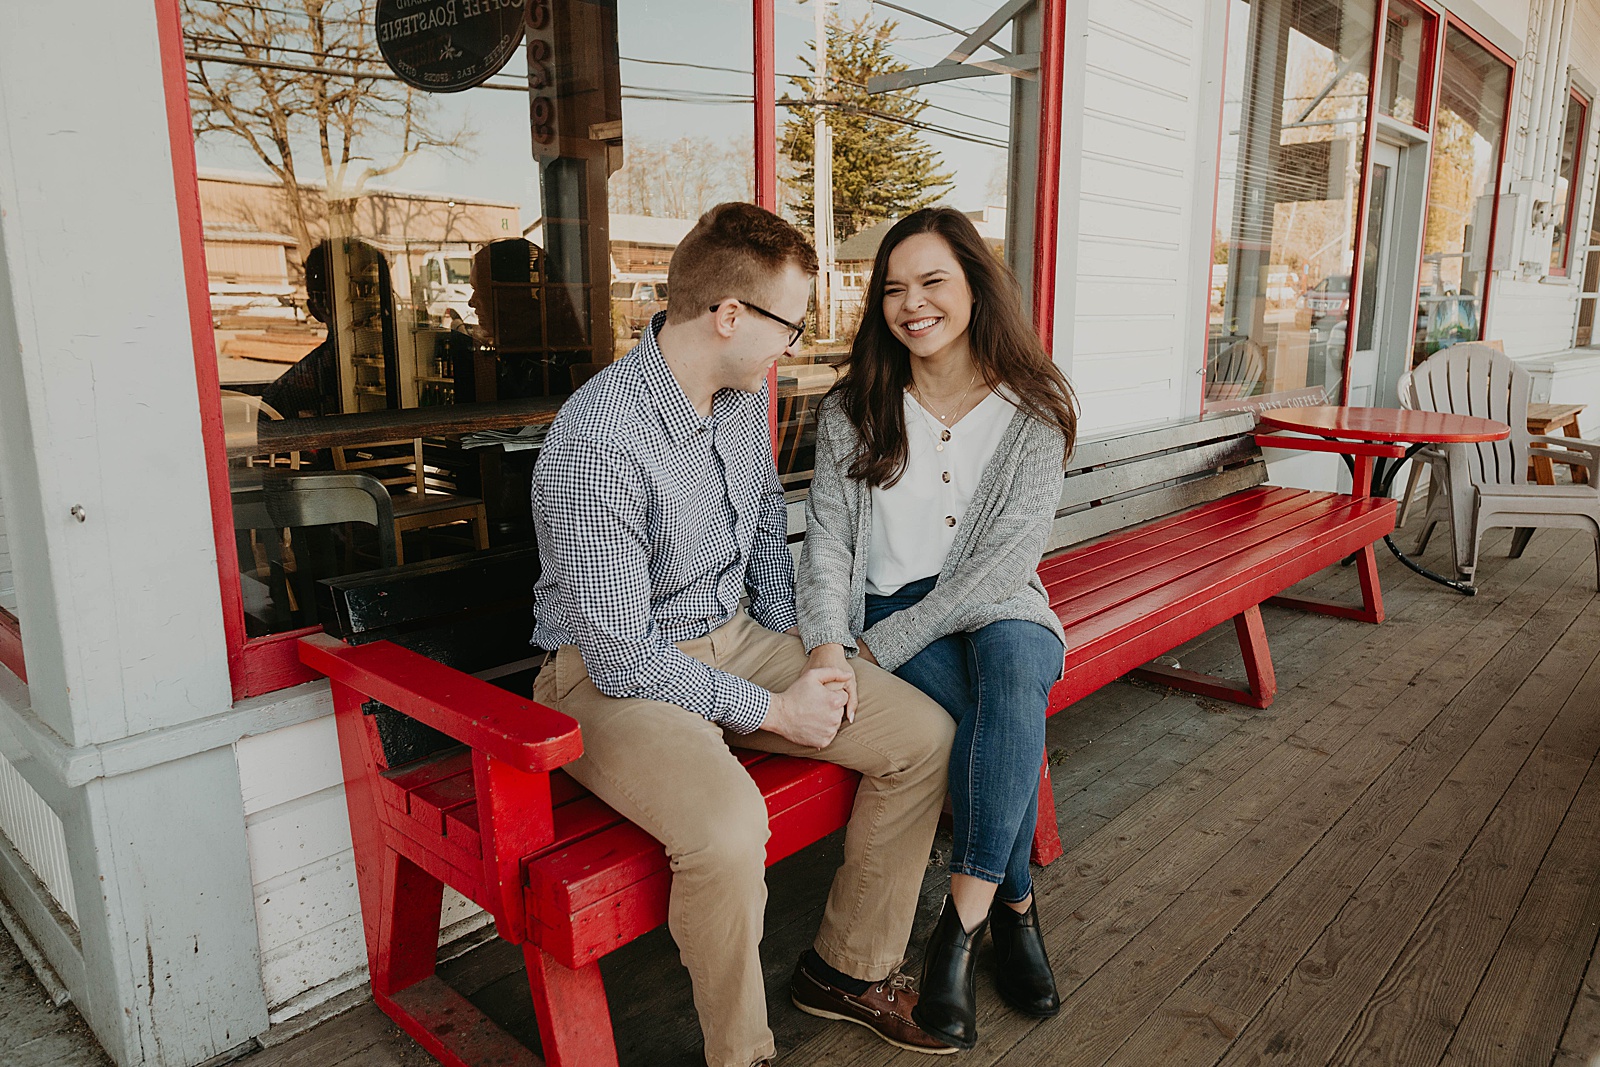 couple sitting on bench laughing